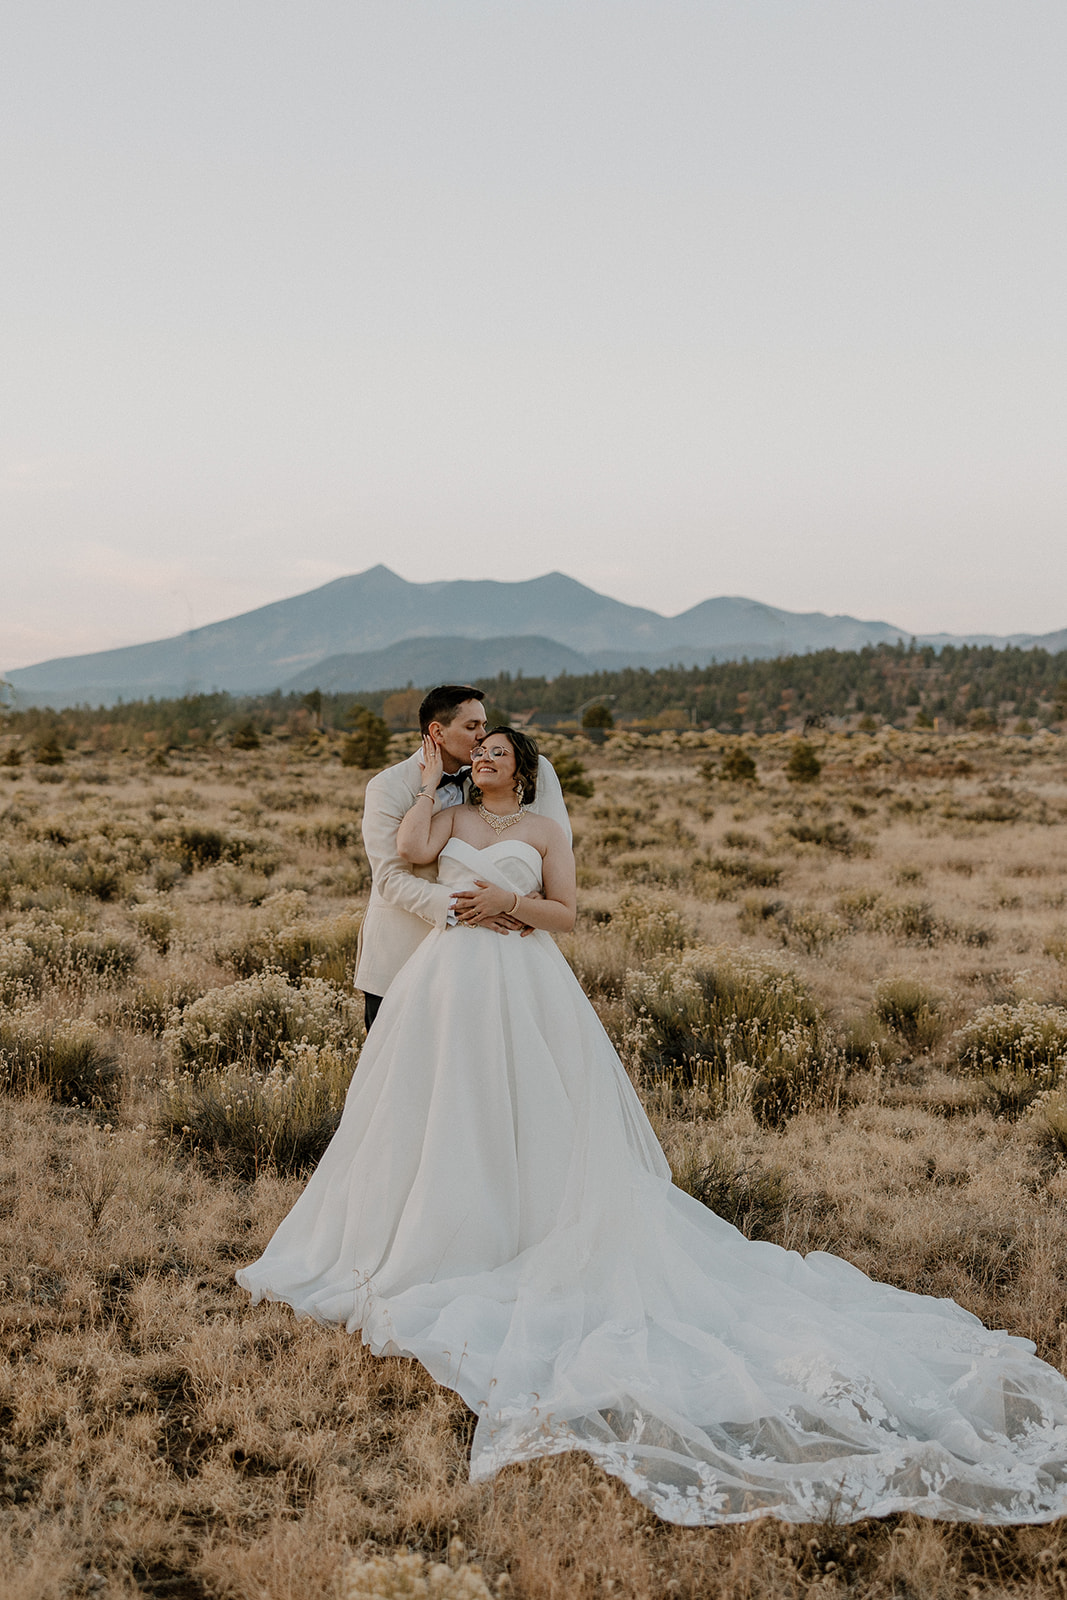 Stunning bride and groom pose together with the Arizona mountains in the background